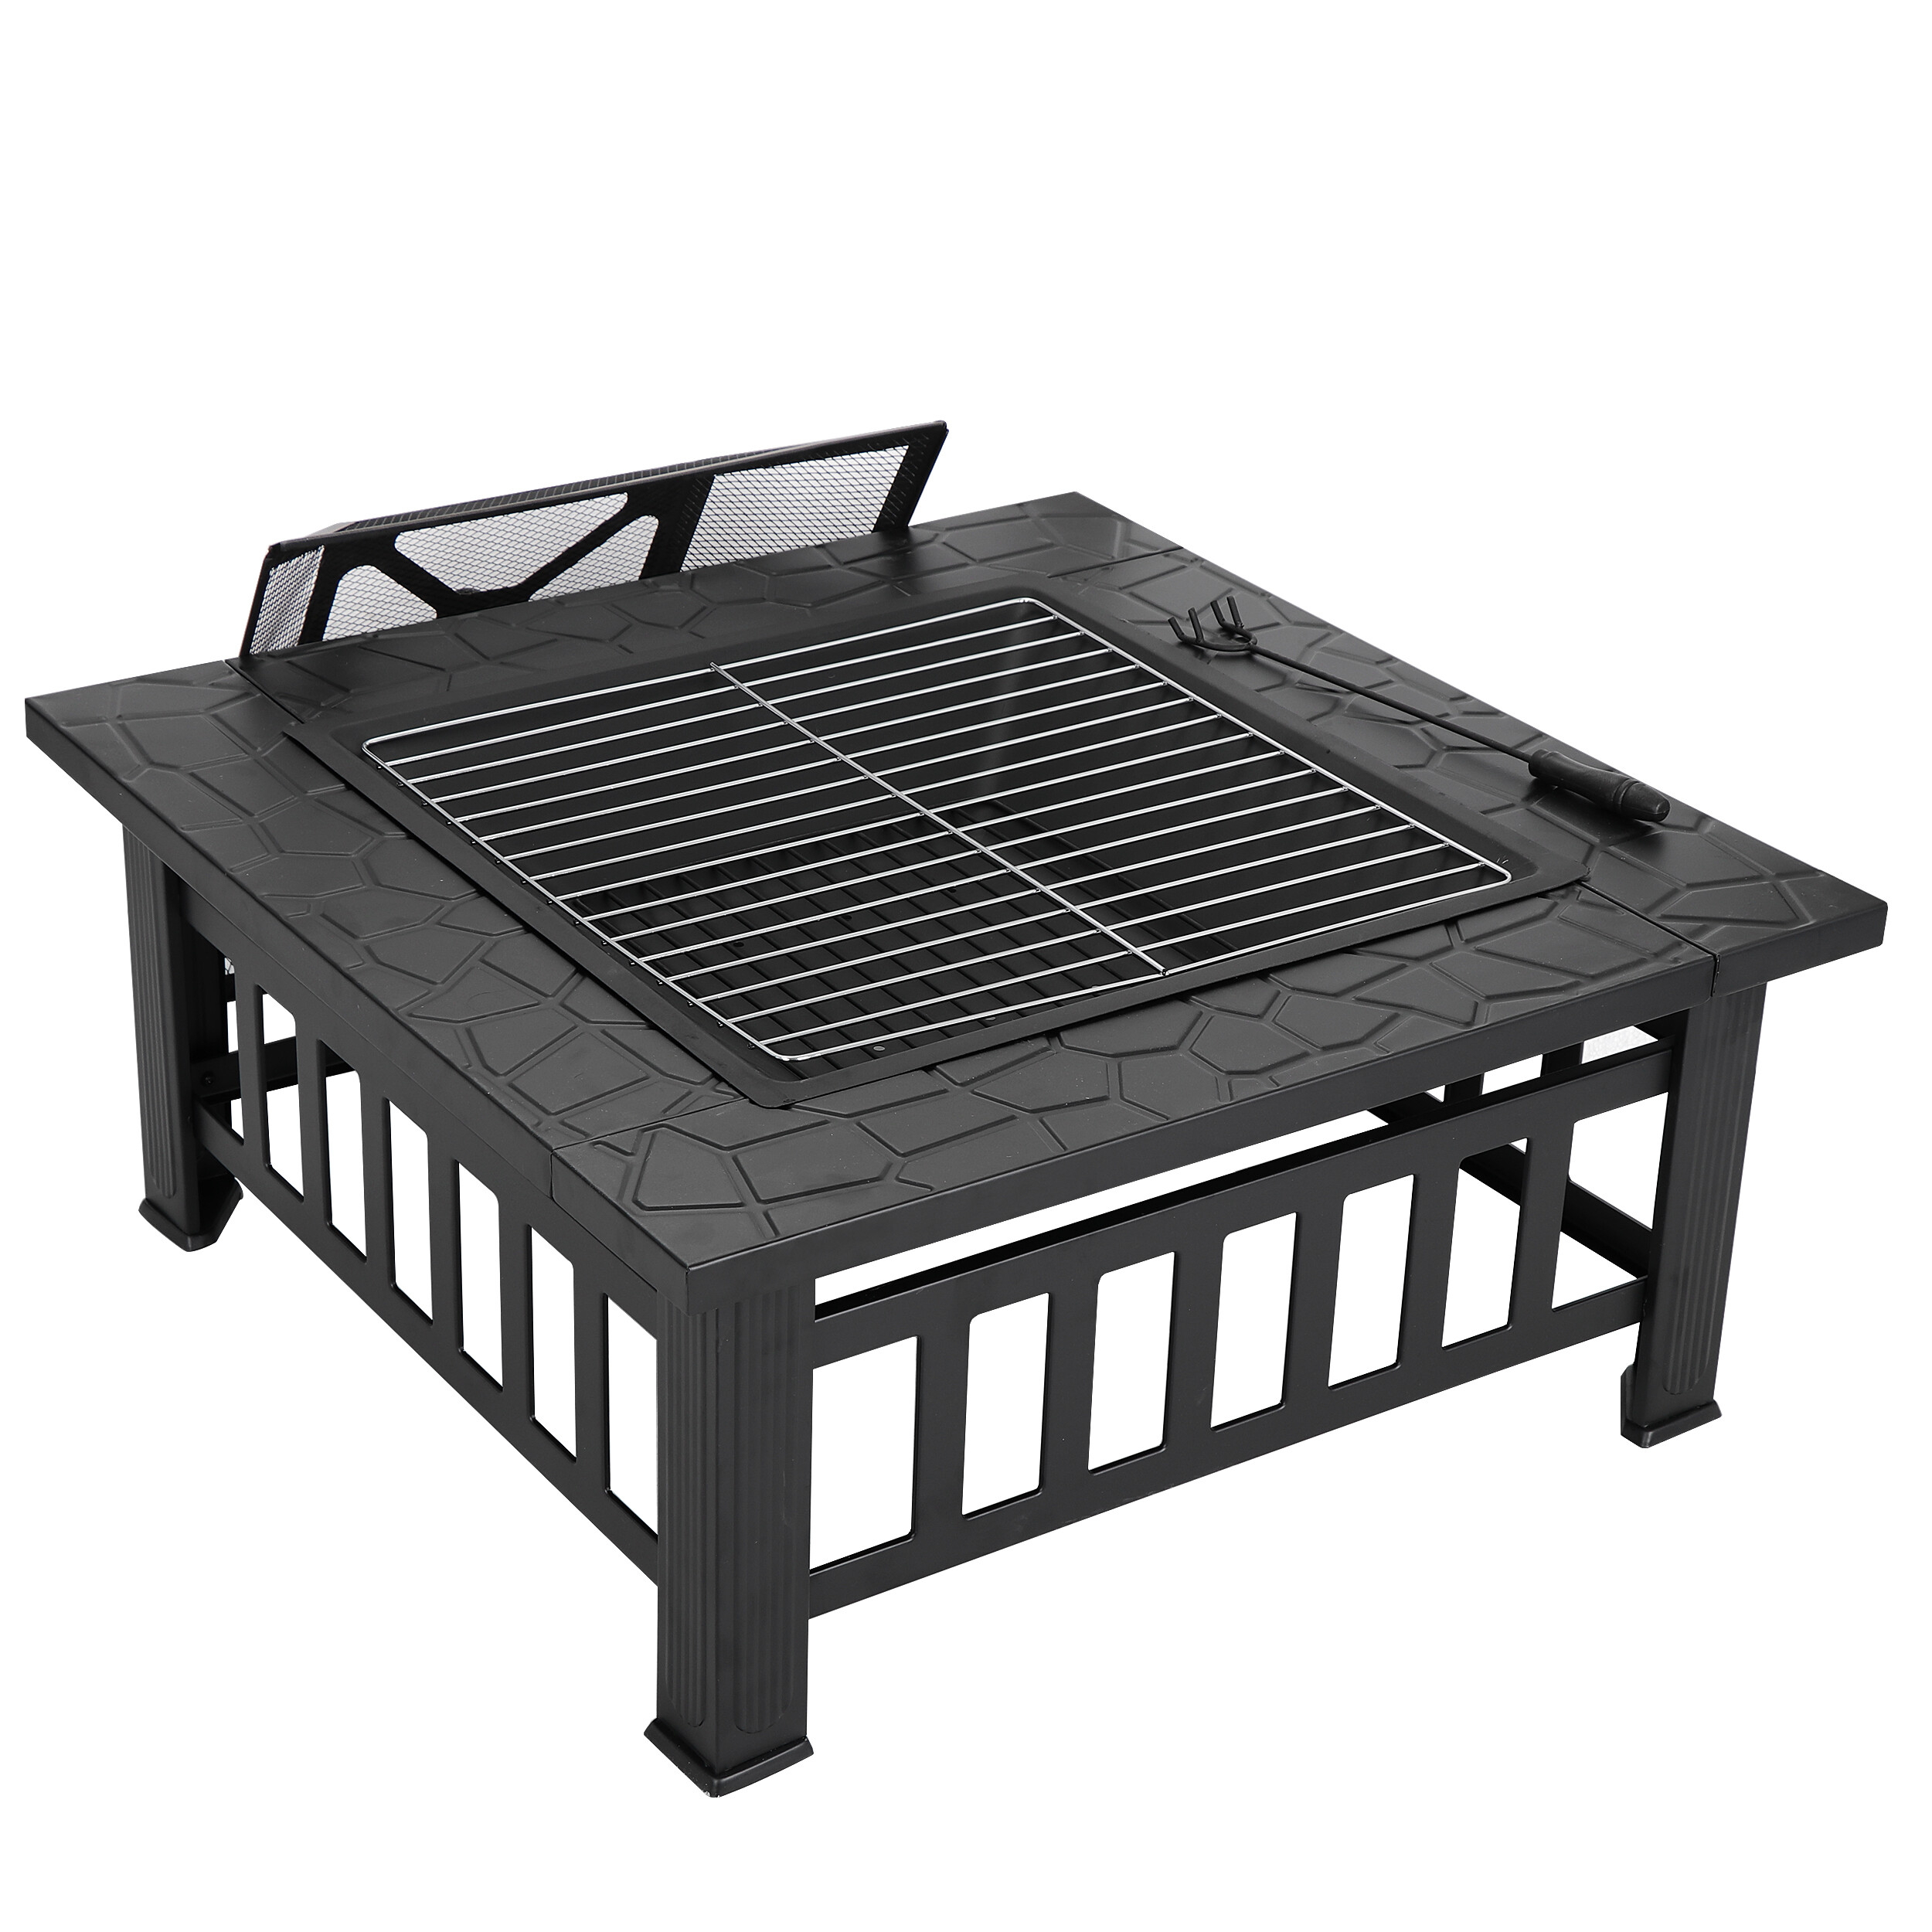 ZENY 32" Outdoor Fire Pit Square Metal Firepit Patio Garden Stove Wood Burning - image 4 of 12